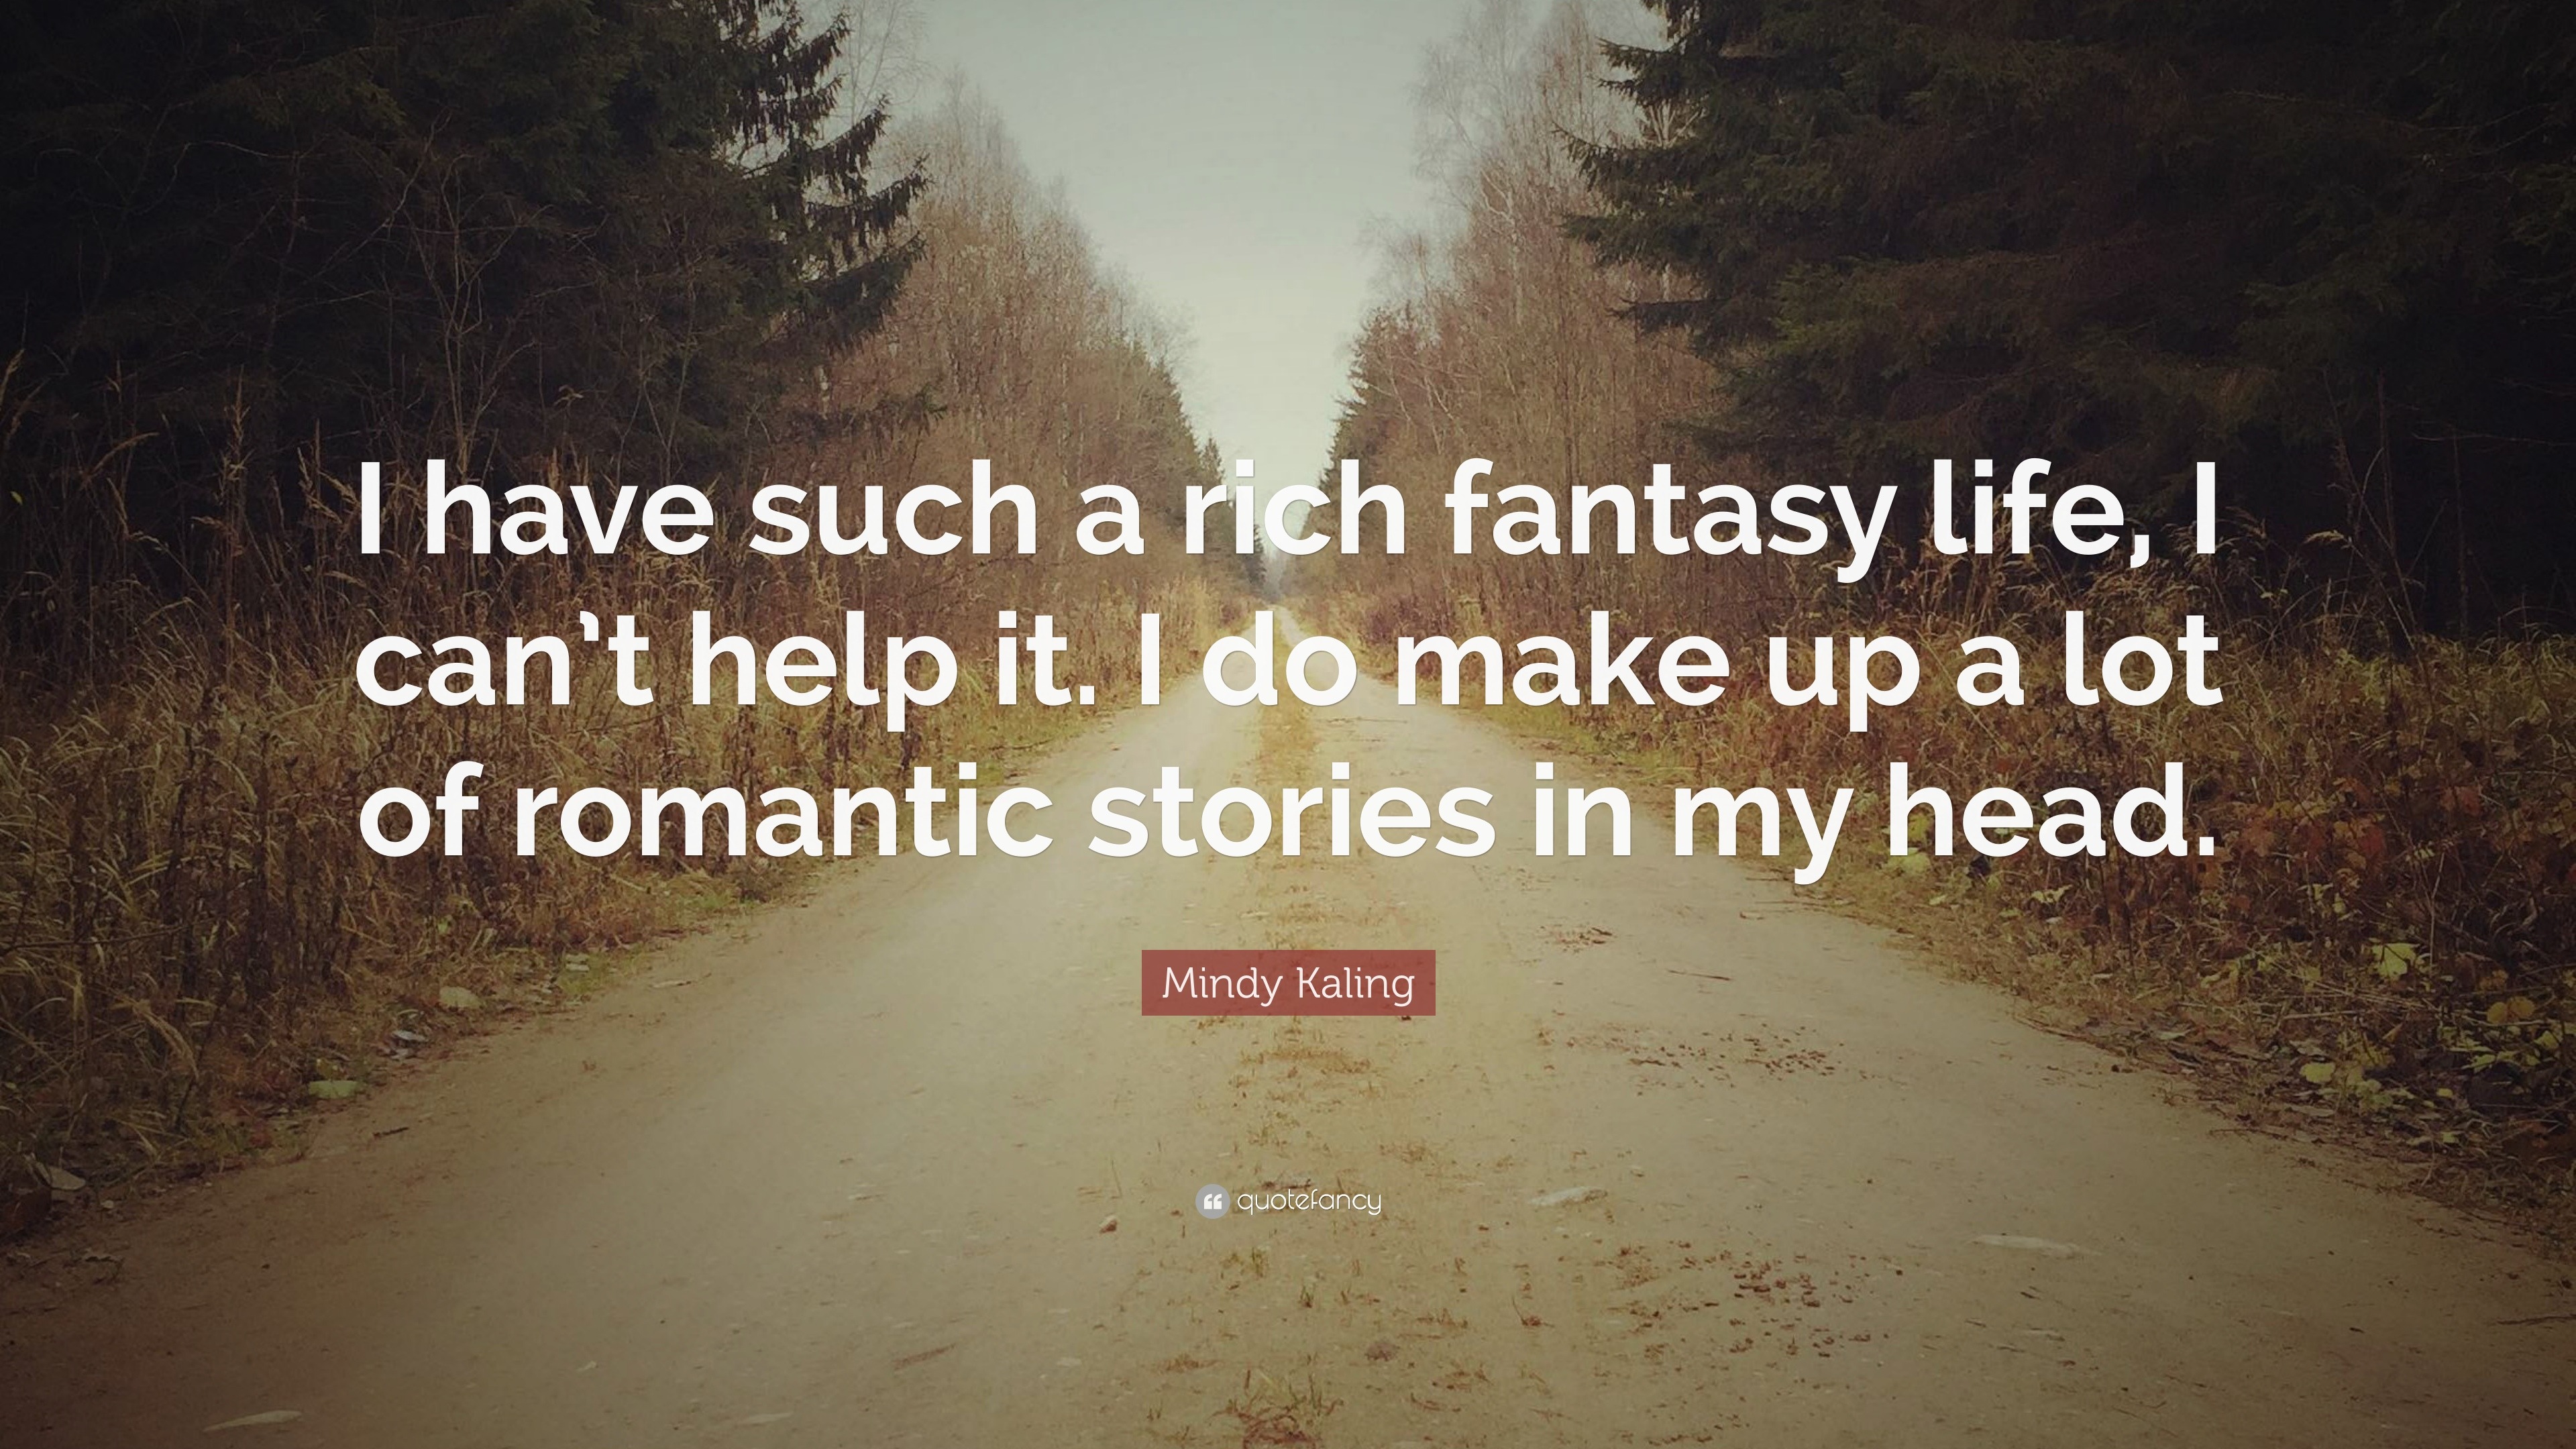 154 Relationship Quotes to Reignite Your Love — Best Life